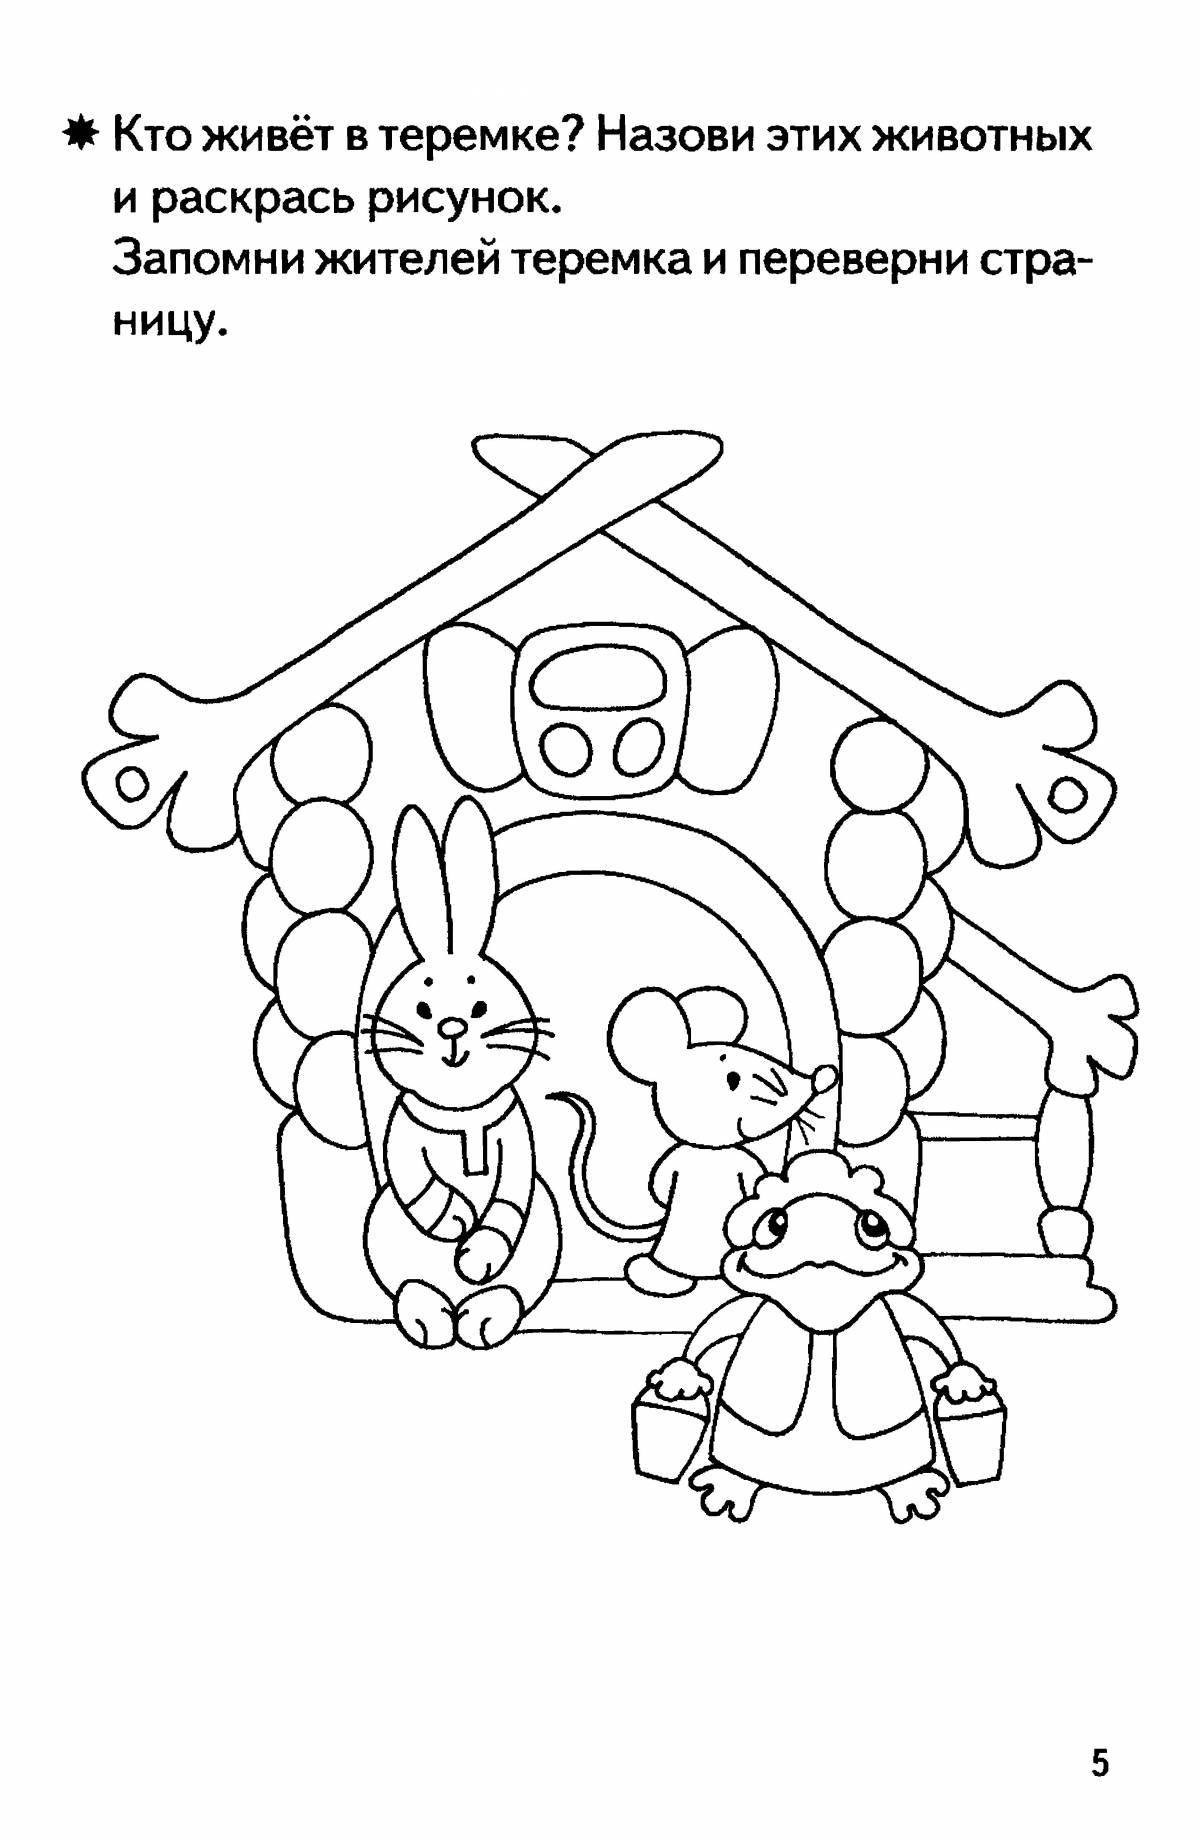 Playful teremok coloring book for children